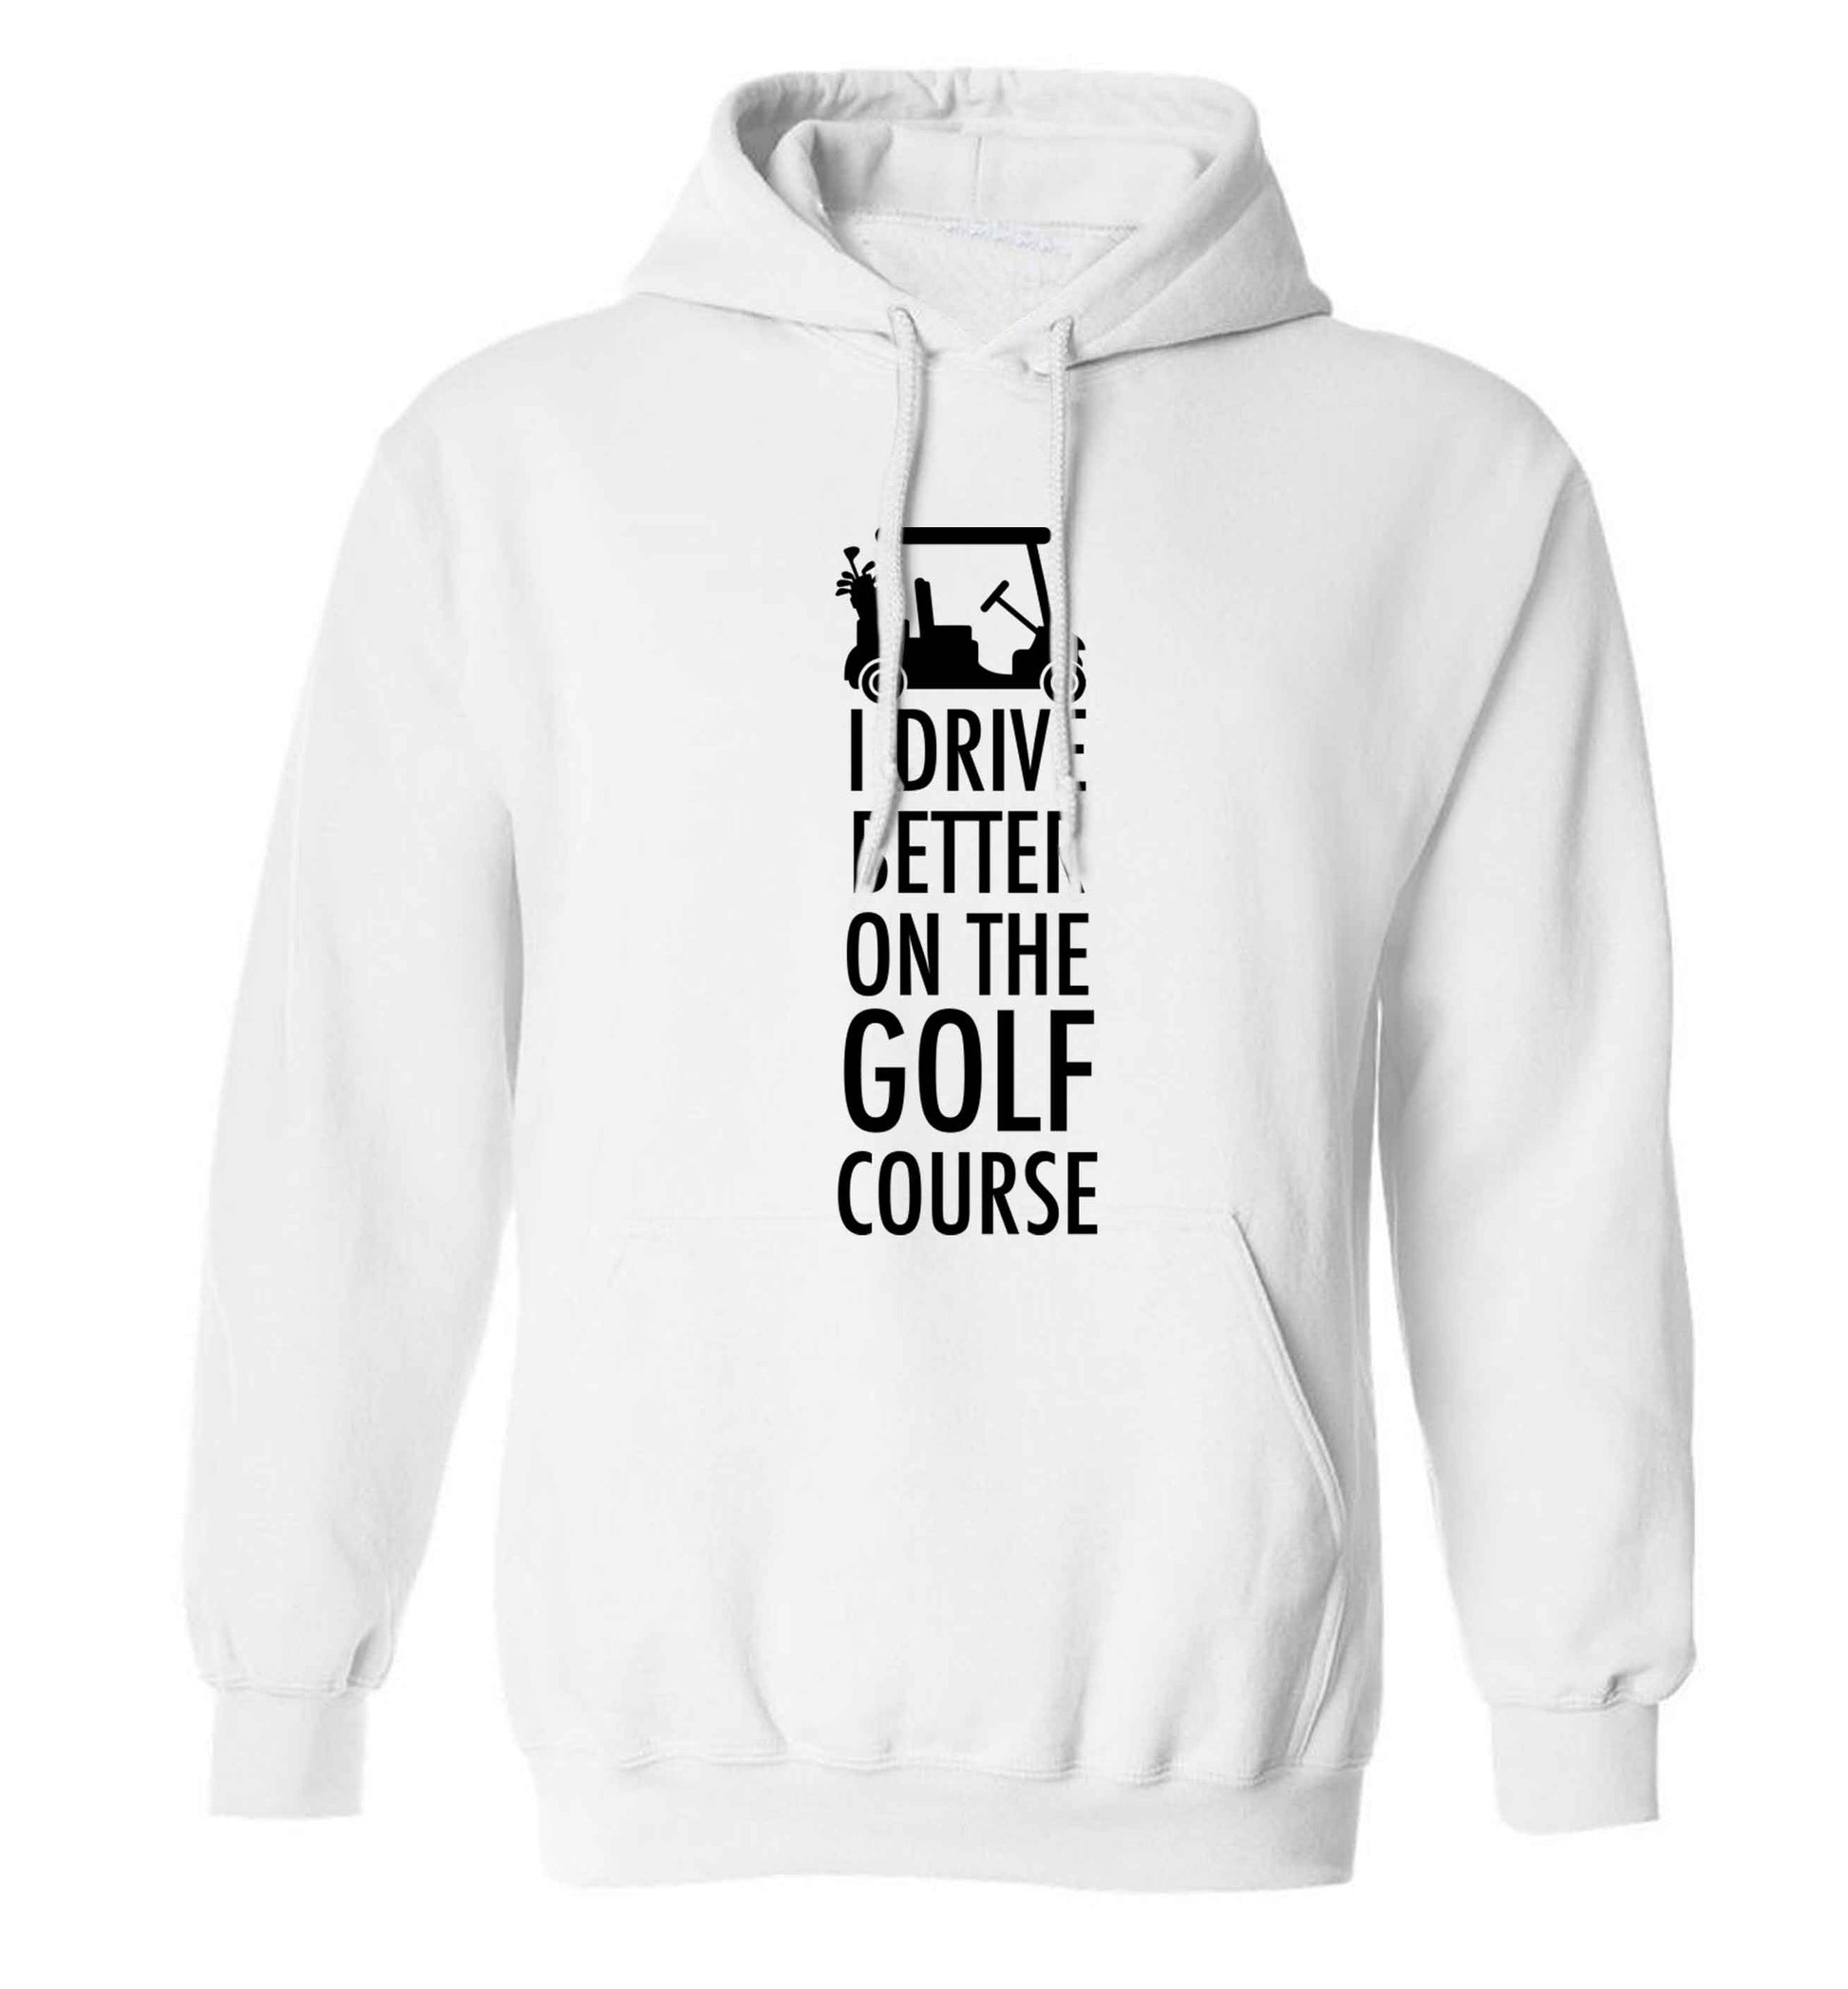 I drive better on the golf course adults unisex white hoodie 2XL